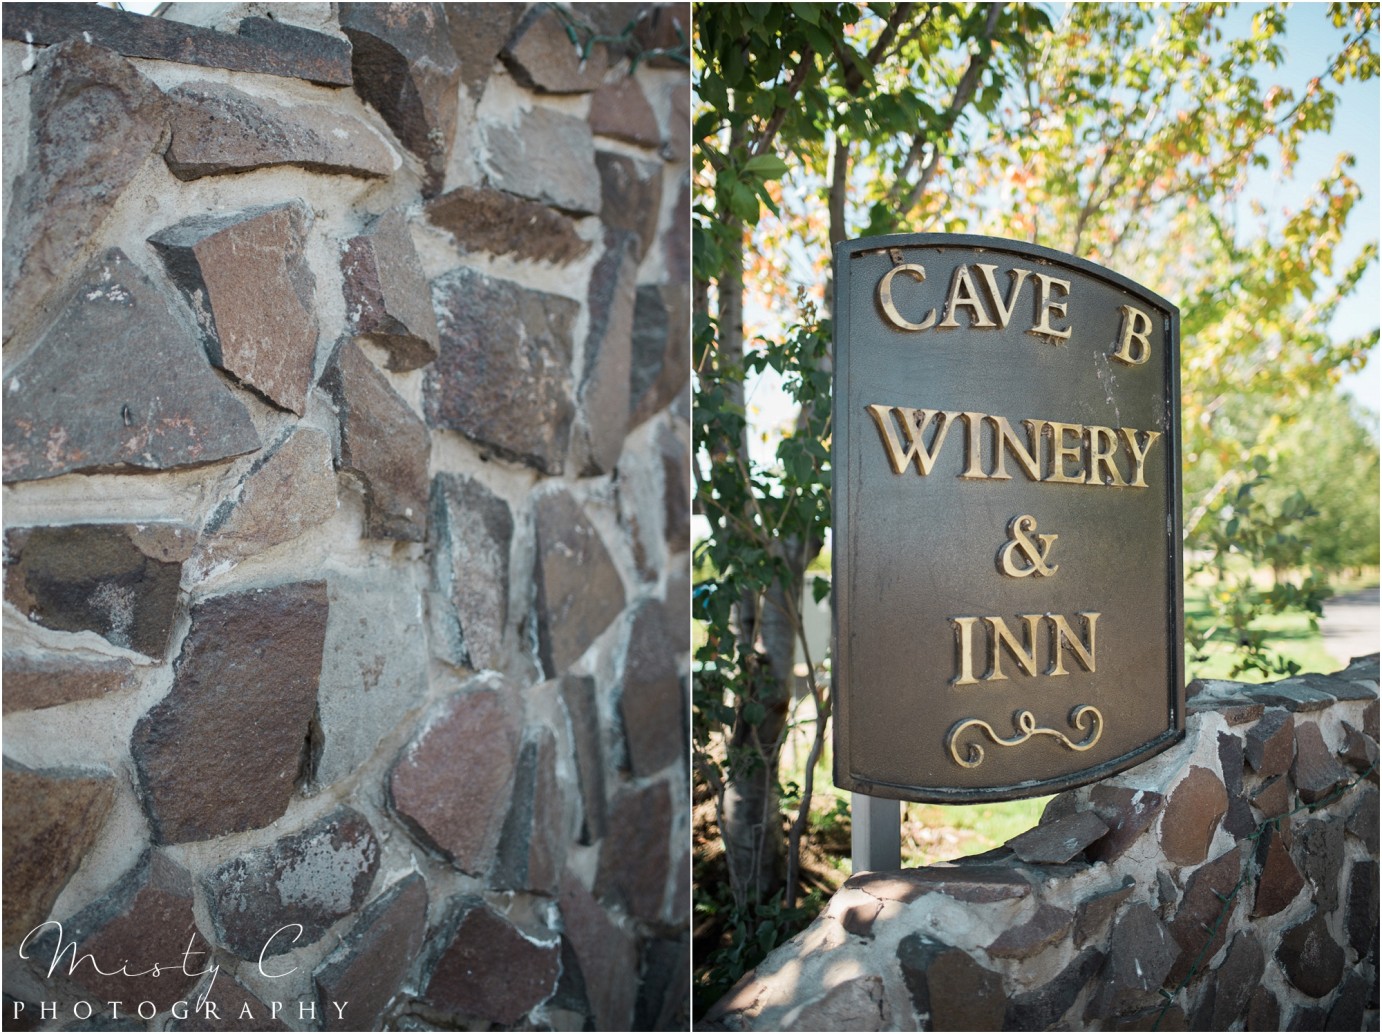 Cave B Winery front signage photo